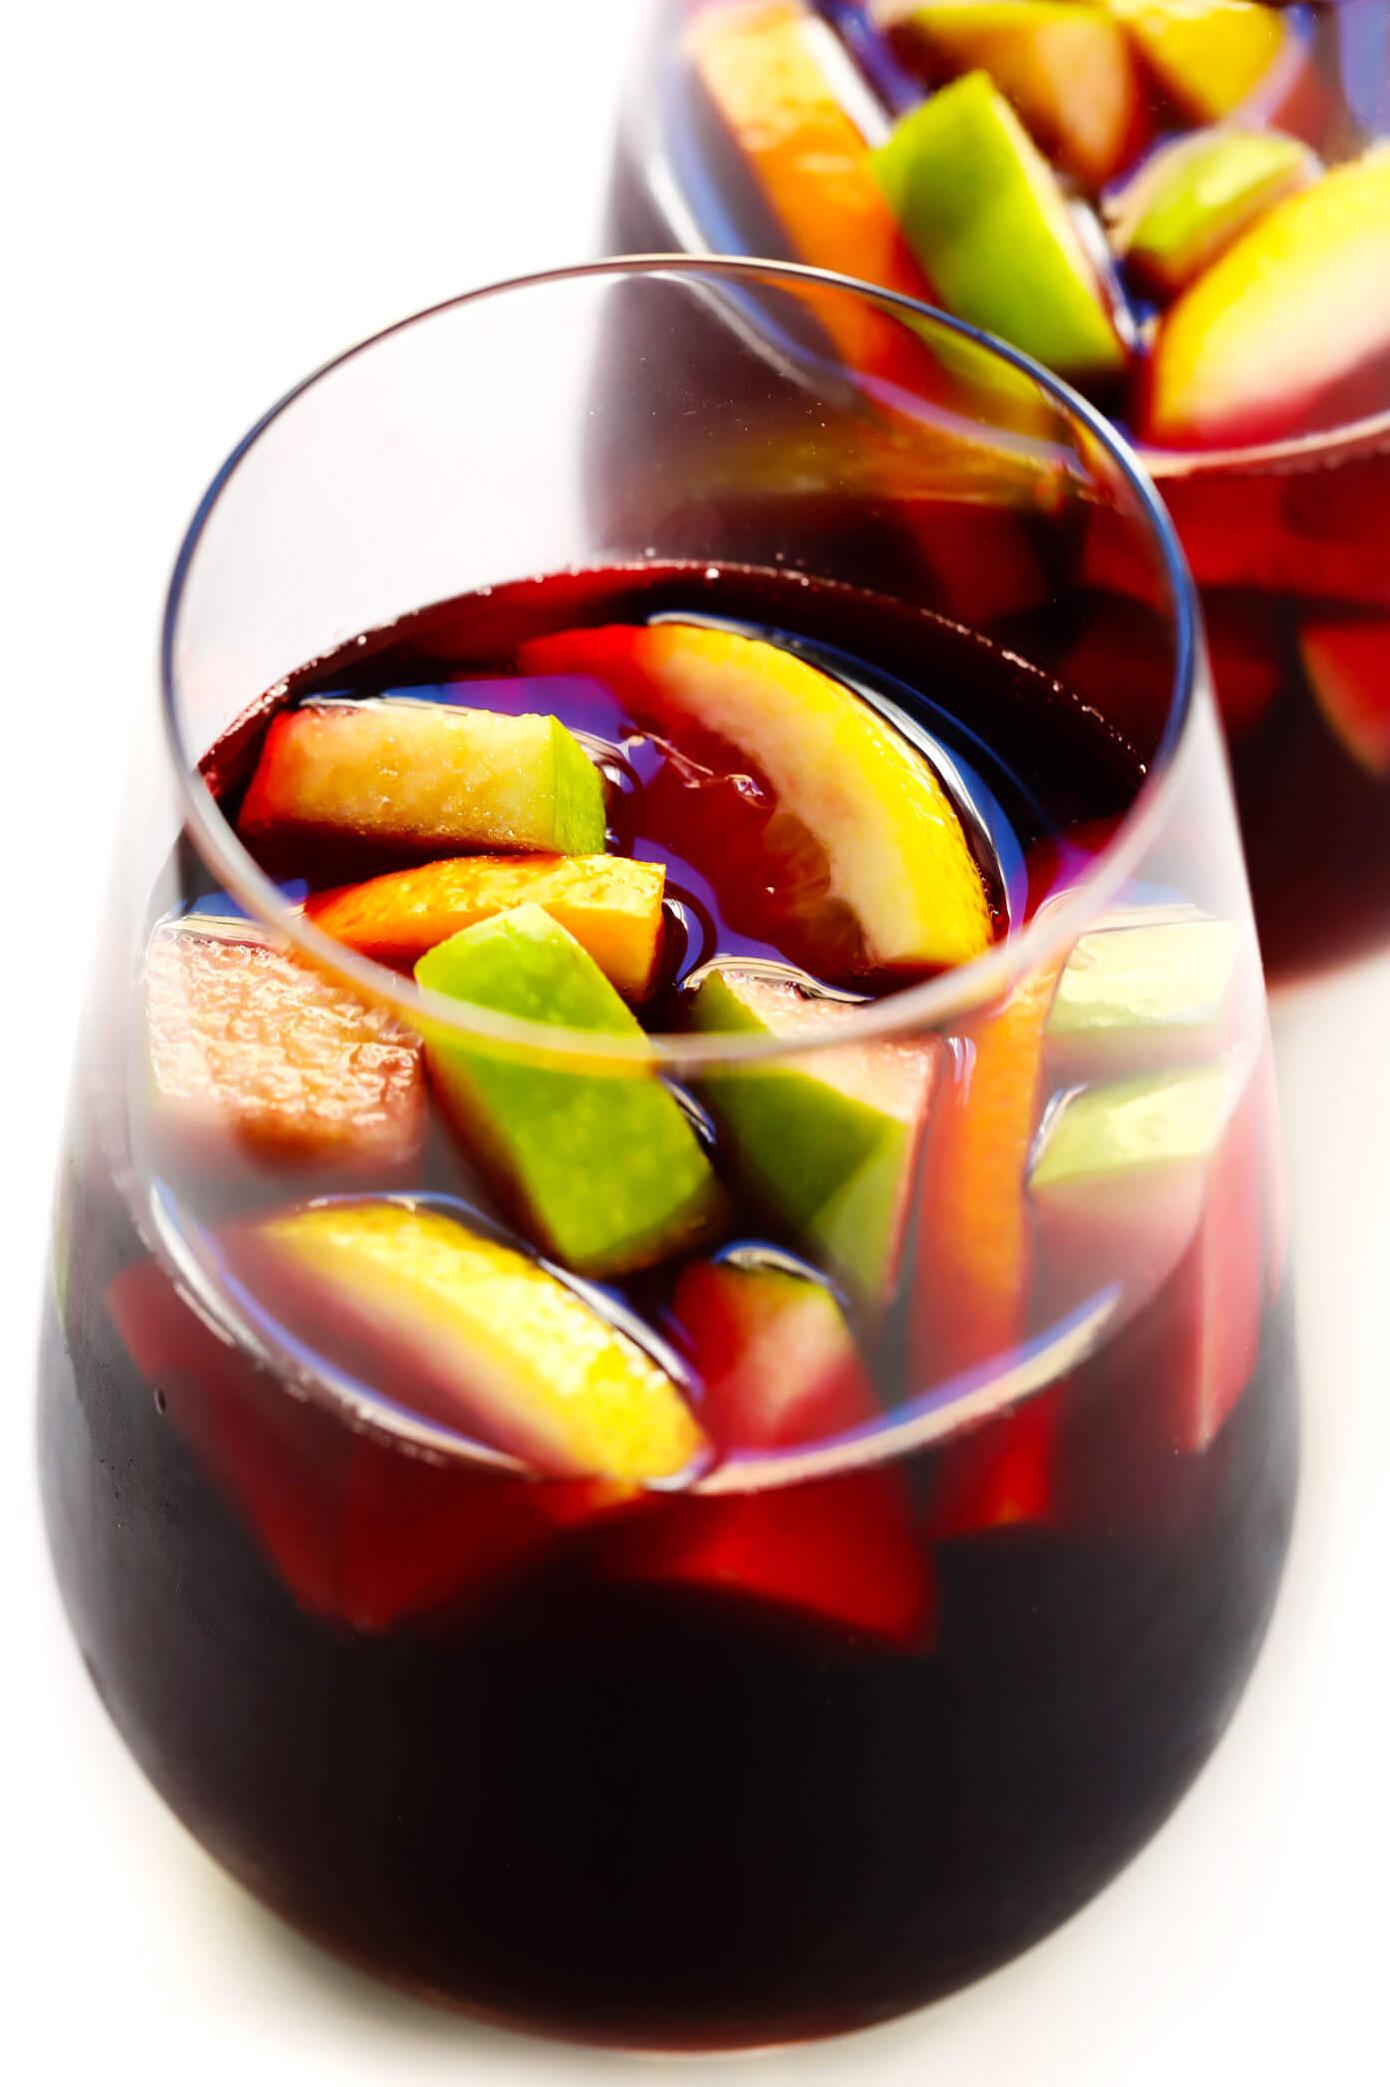  Keep your guests feeling warm and welcomed with this delicious brandy-wine punch recipe!